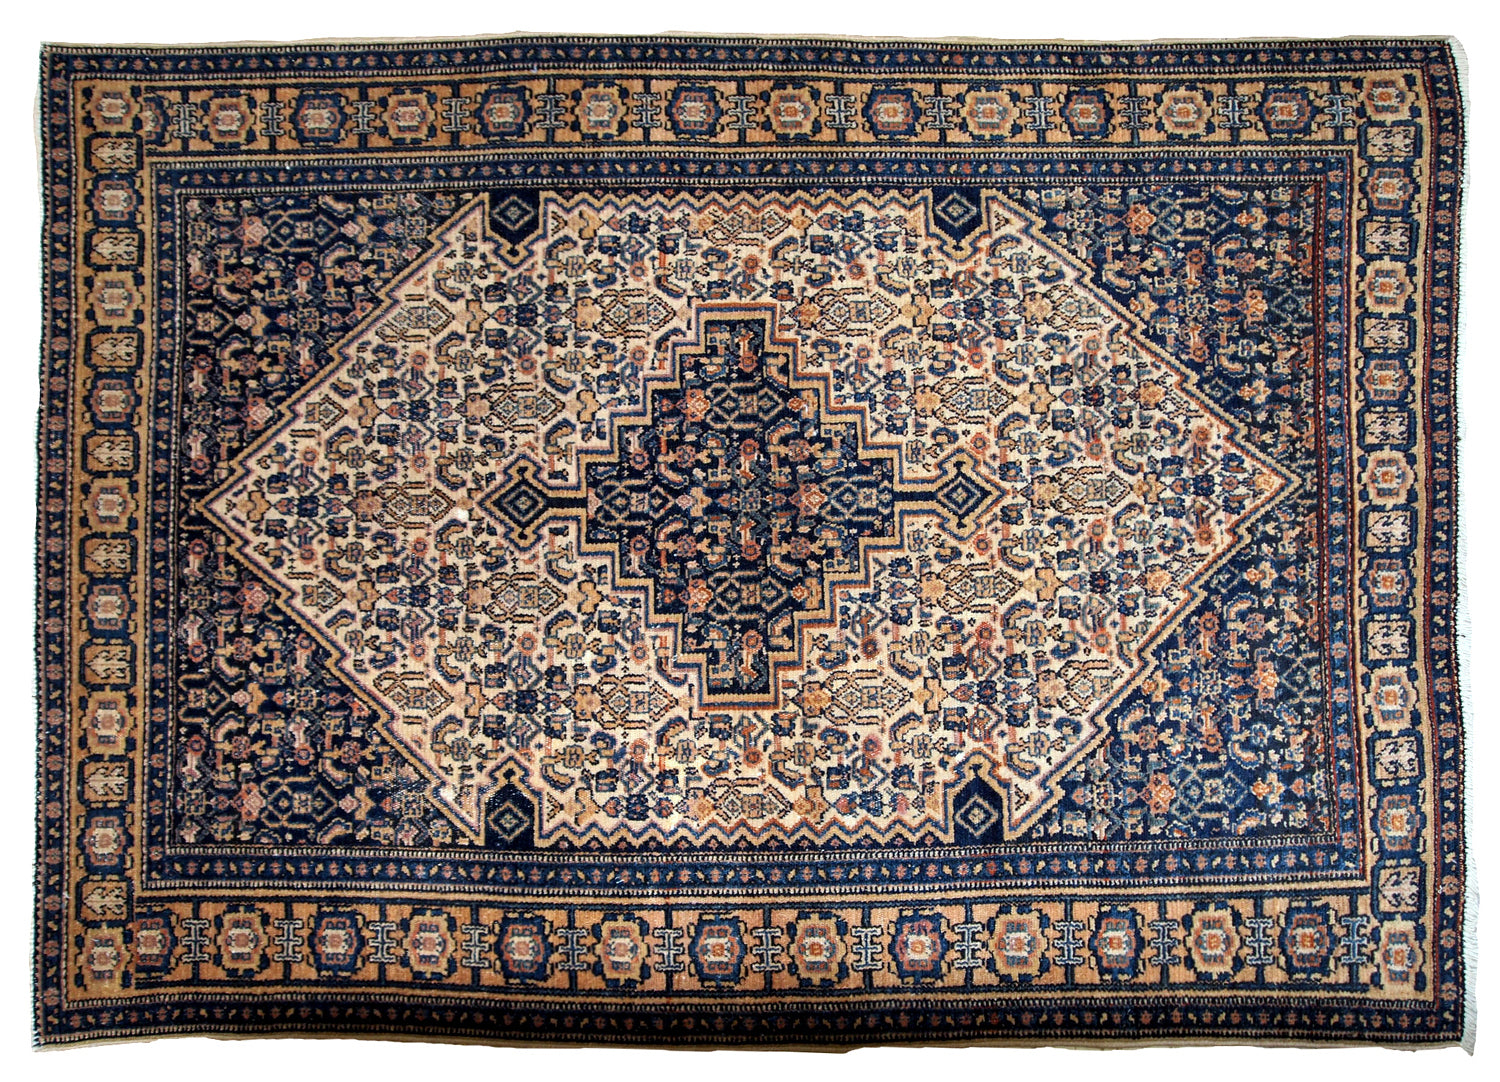 Antique Bibikabab rug in beige and navy blue shades. The rug is from the beginning of 20th century in original good condition. 